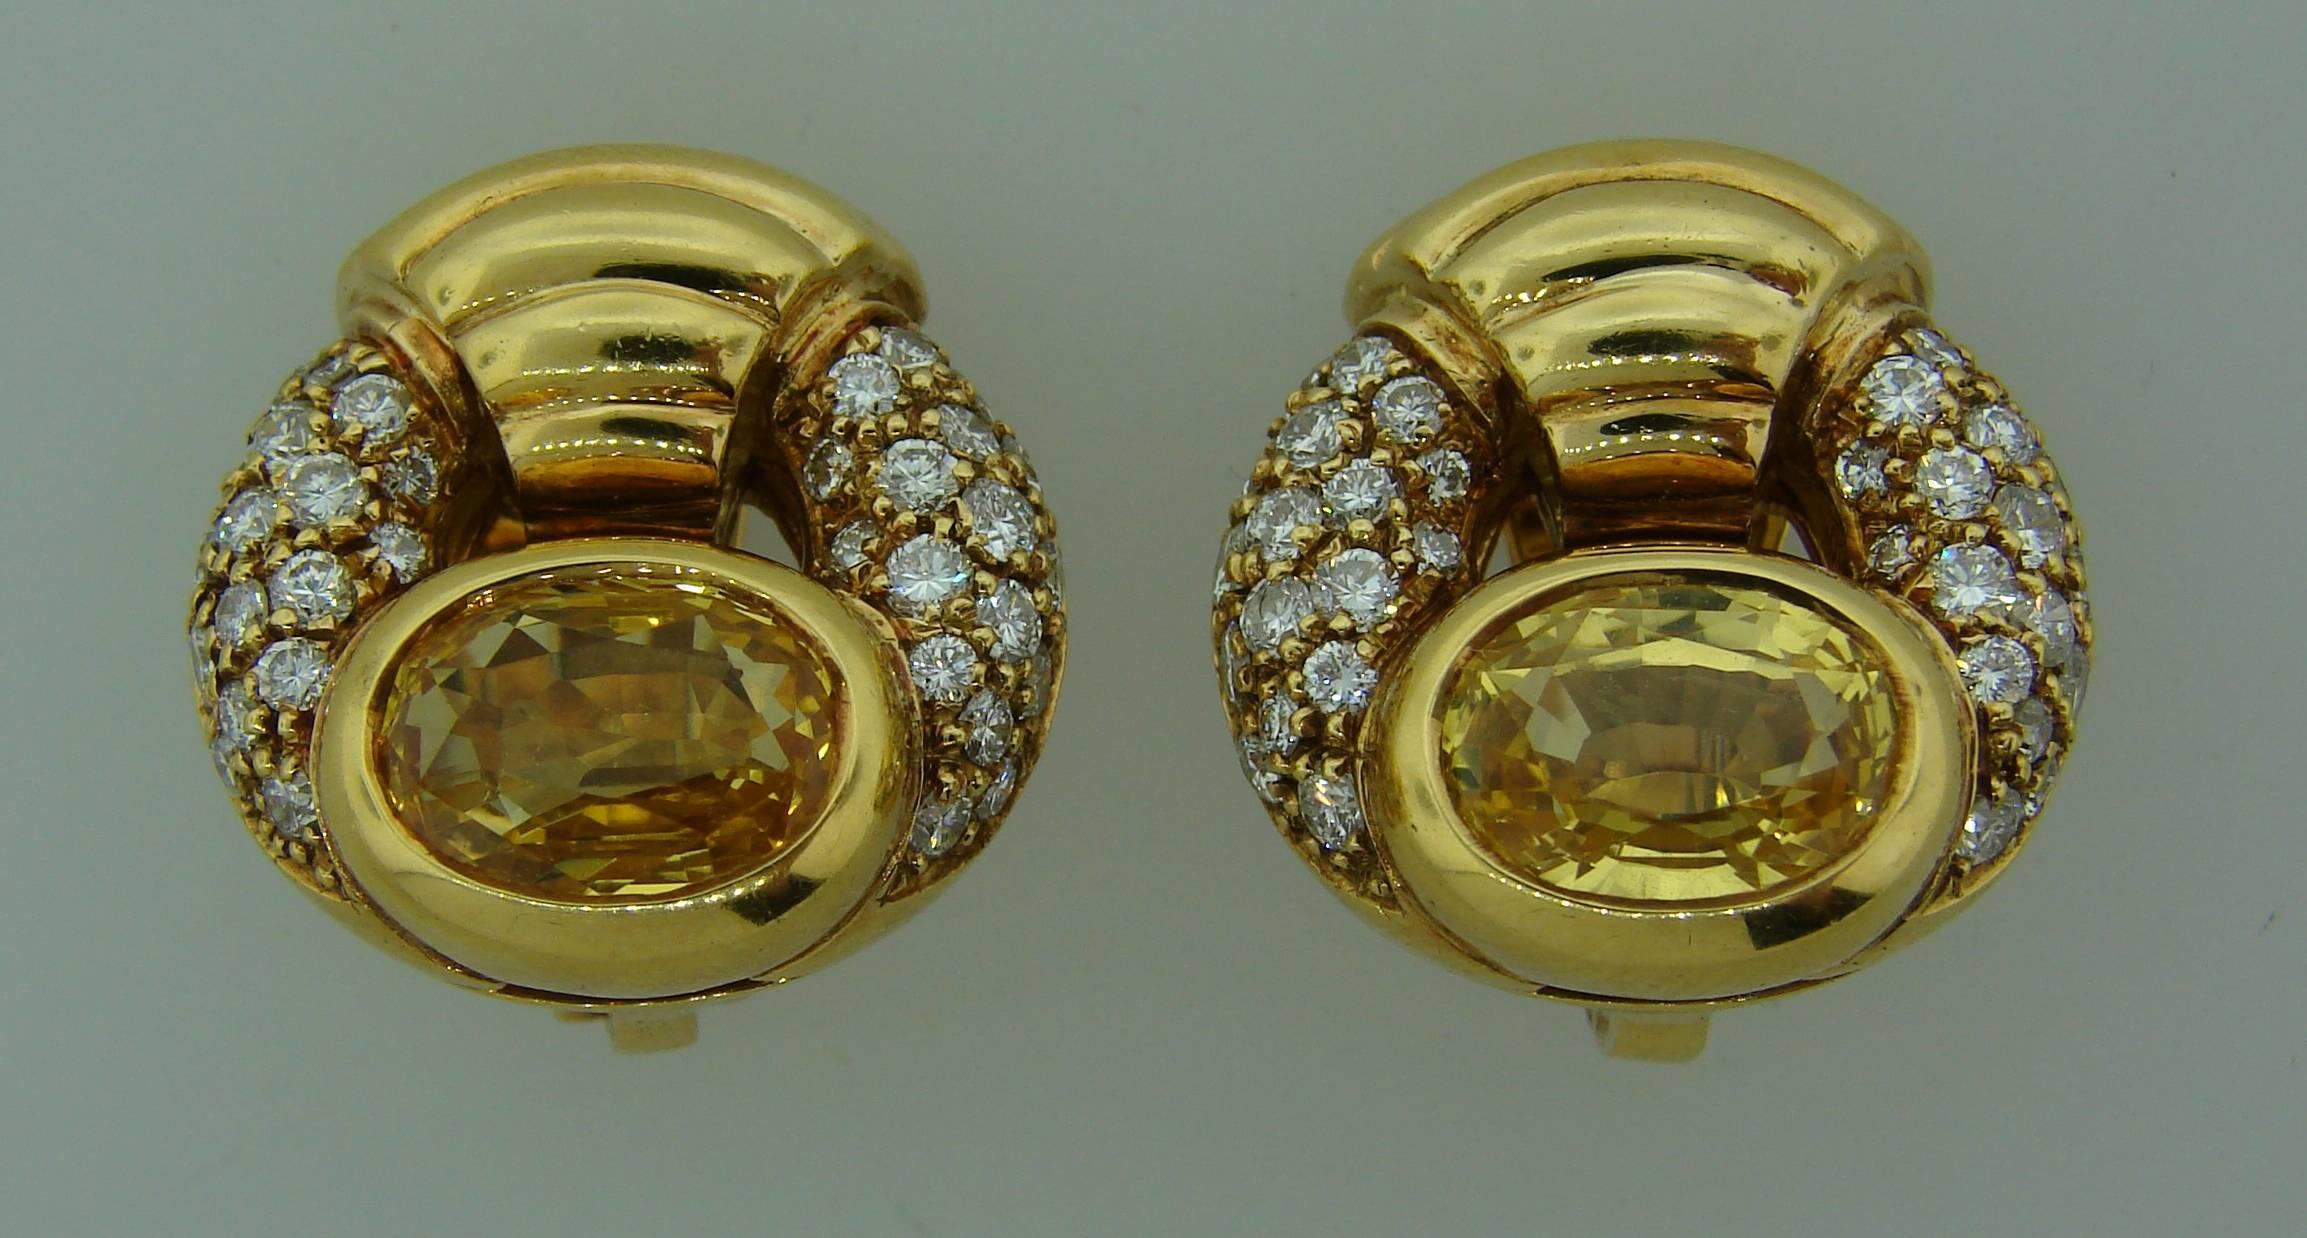 Elegant and stylish earrings created by Bulgari in the 1980's. Feature oval yellow sapphire set in 18k yellow gold and studded with round brilliant cut diamonds. Sapphires total weight is approximately 4.64 carats, diamond total weight is